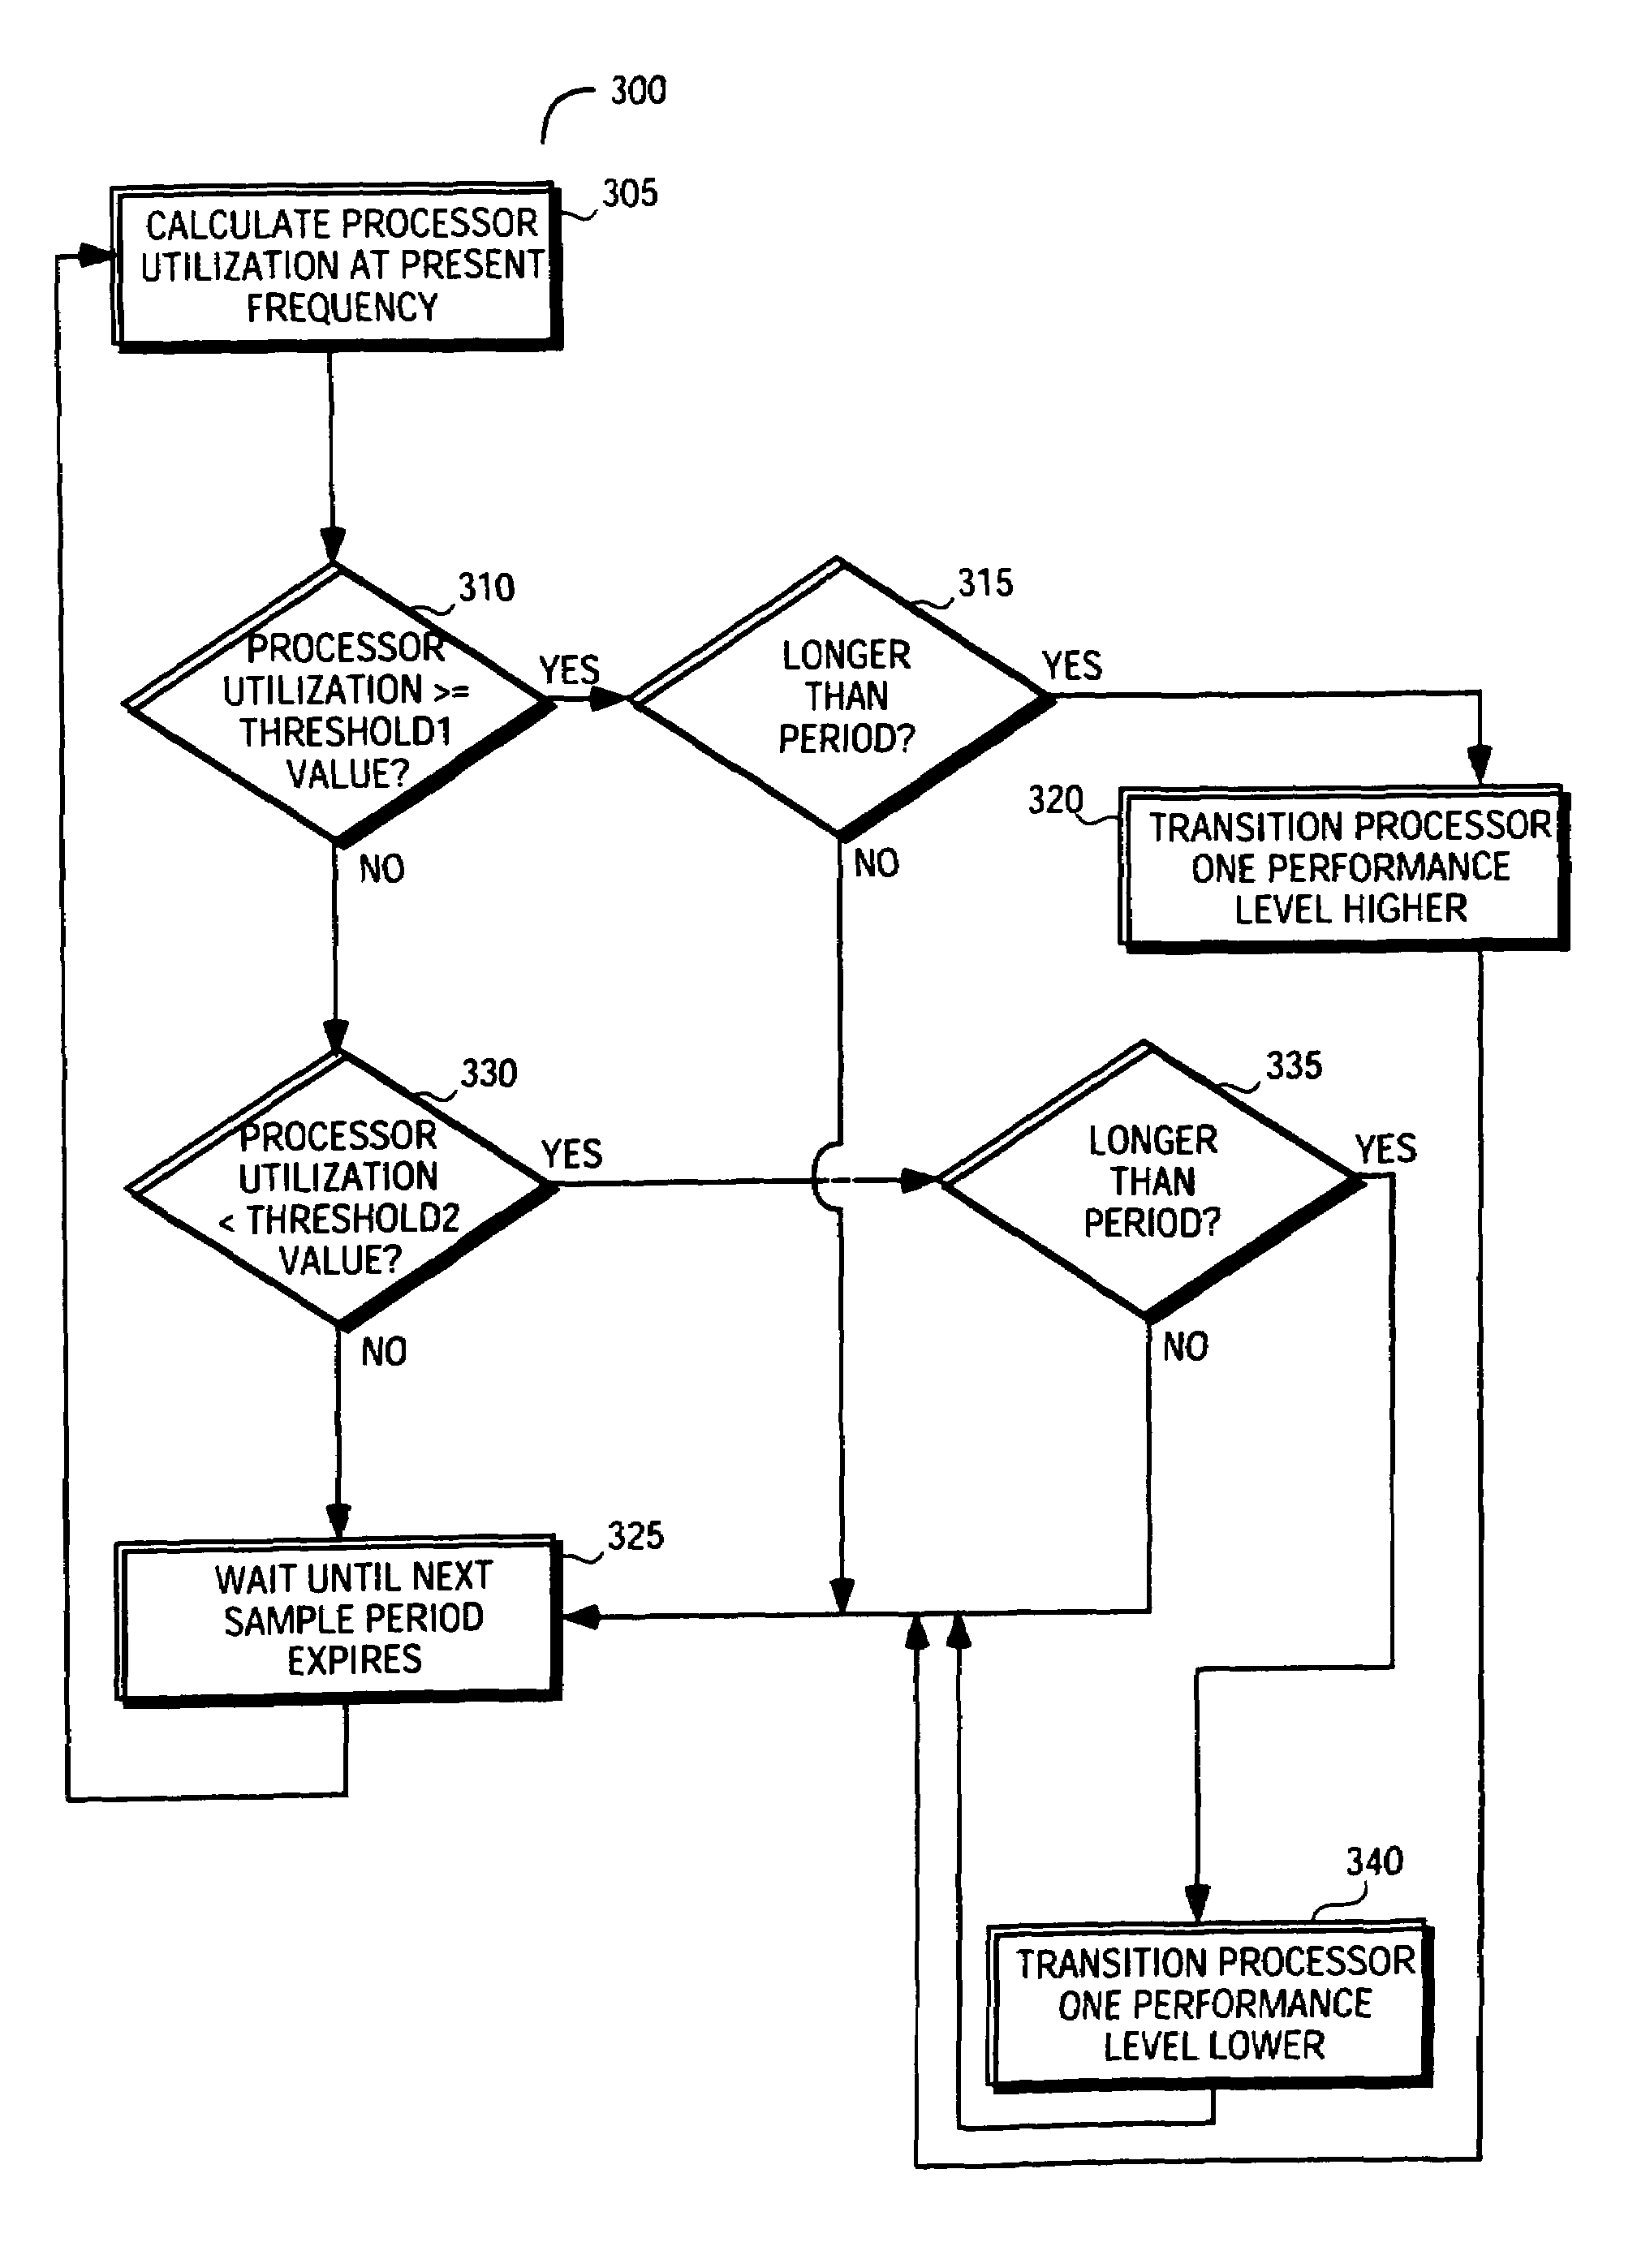 Power management system that changes processor level if processor utilization crosses threshold over a period that is different for switching up or down